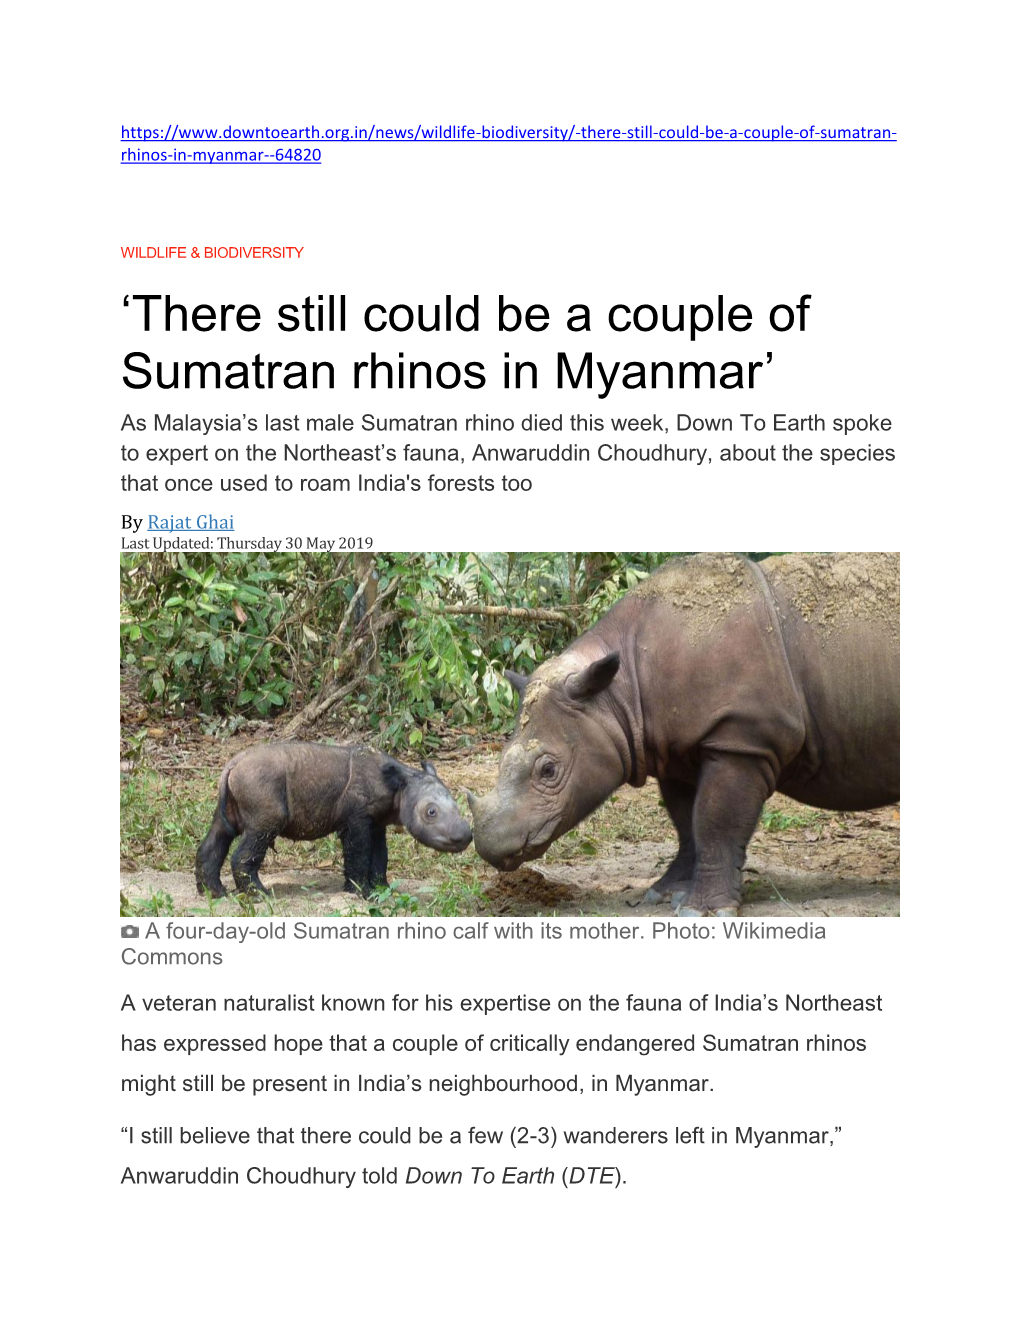 'There Still Could Be a Couple of Sumatran Rhinos in Myanmar'